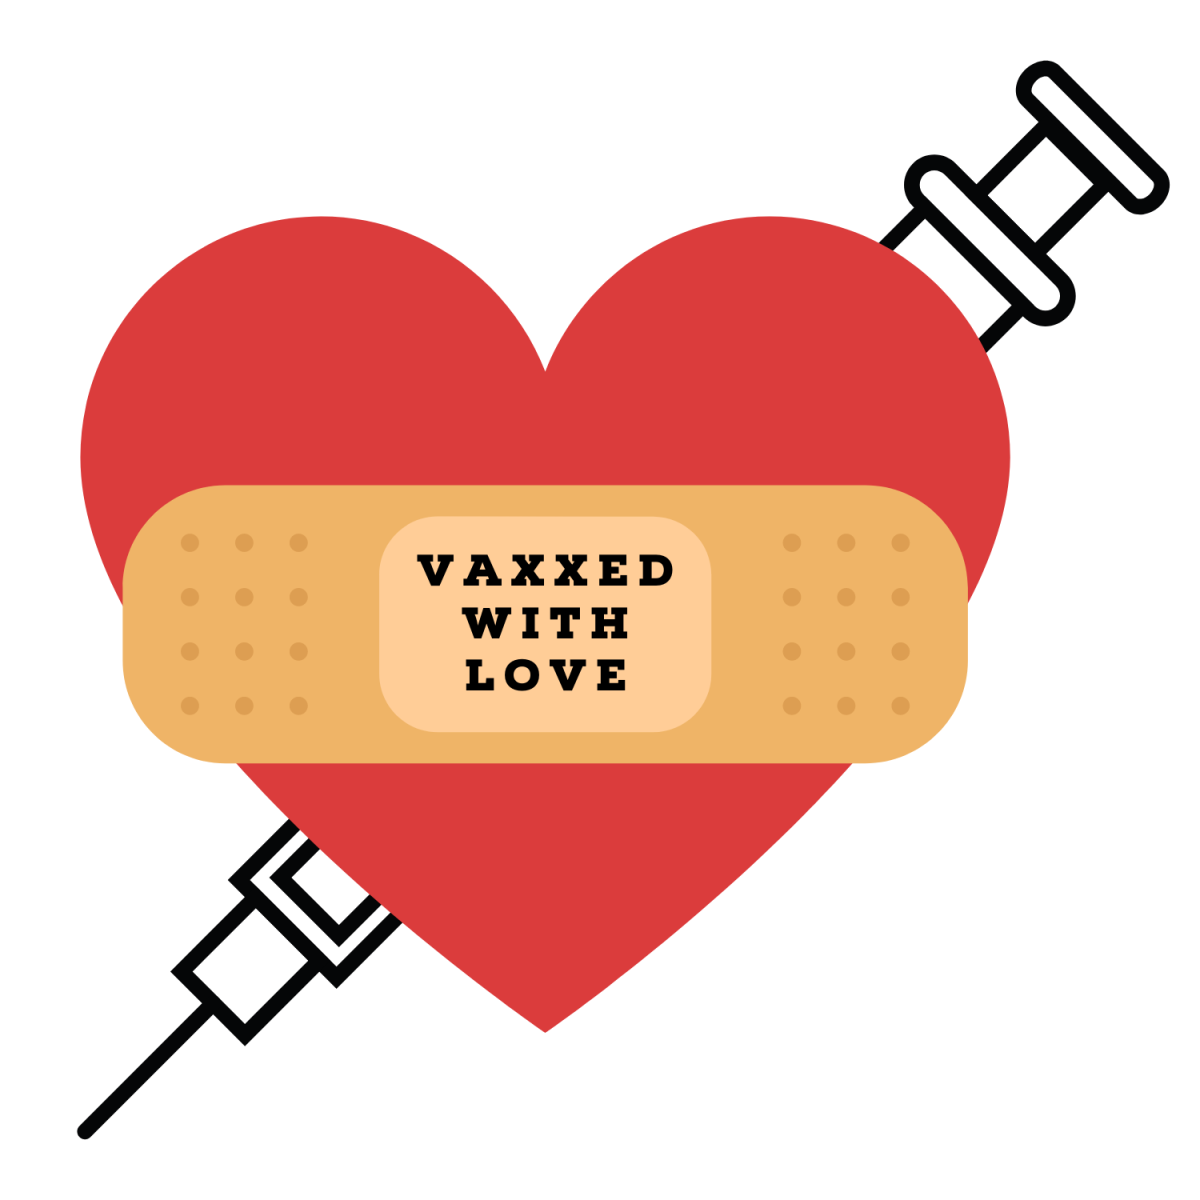 VAXXED WITH LOVE